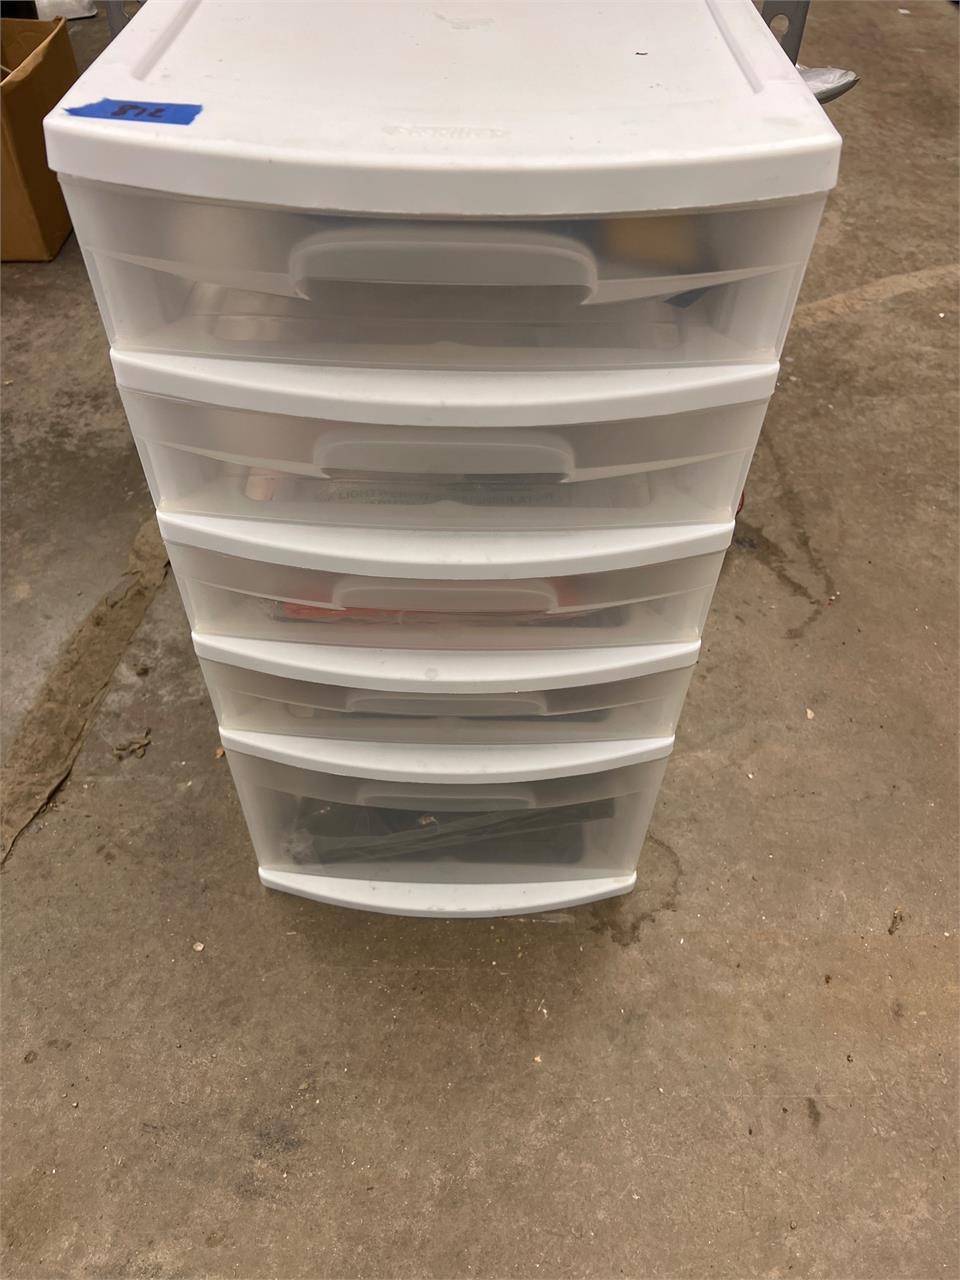 Storage drawers with survival items